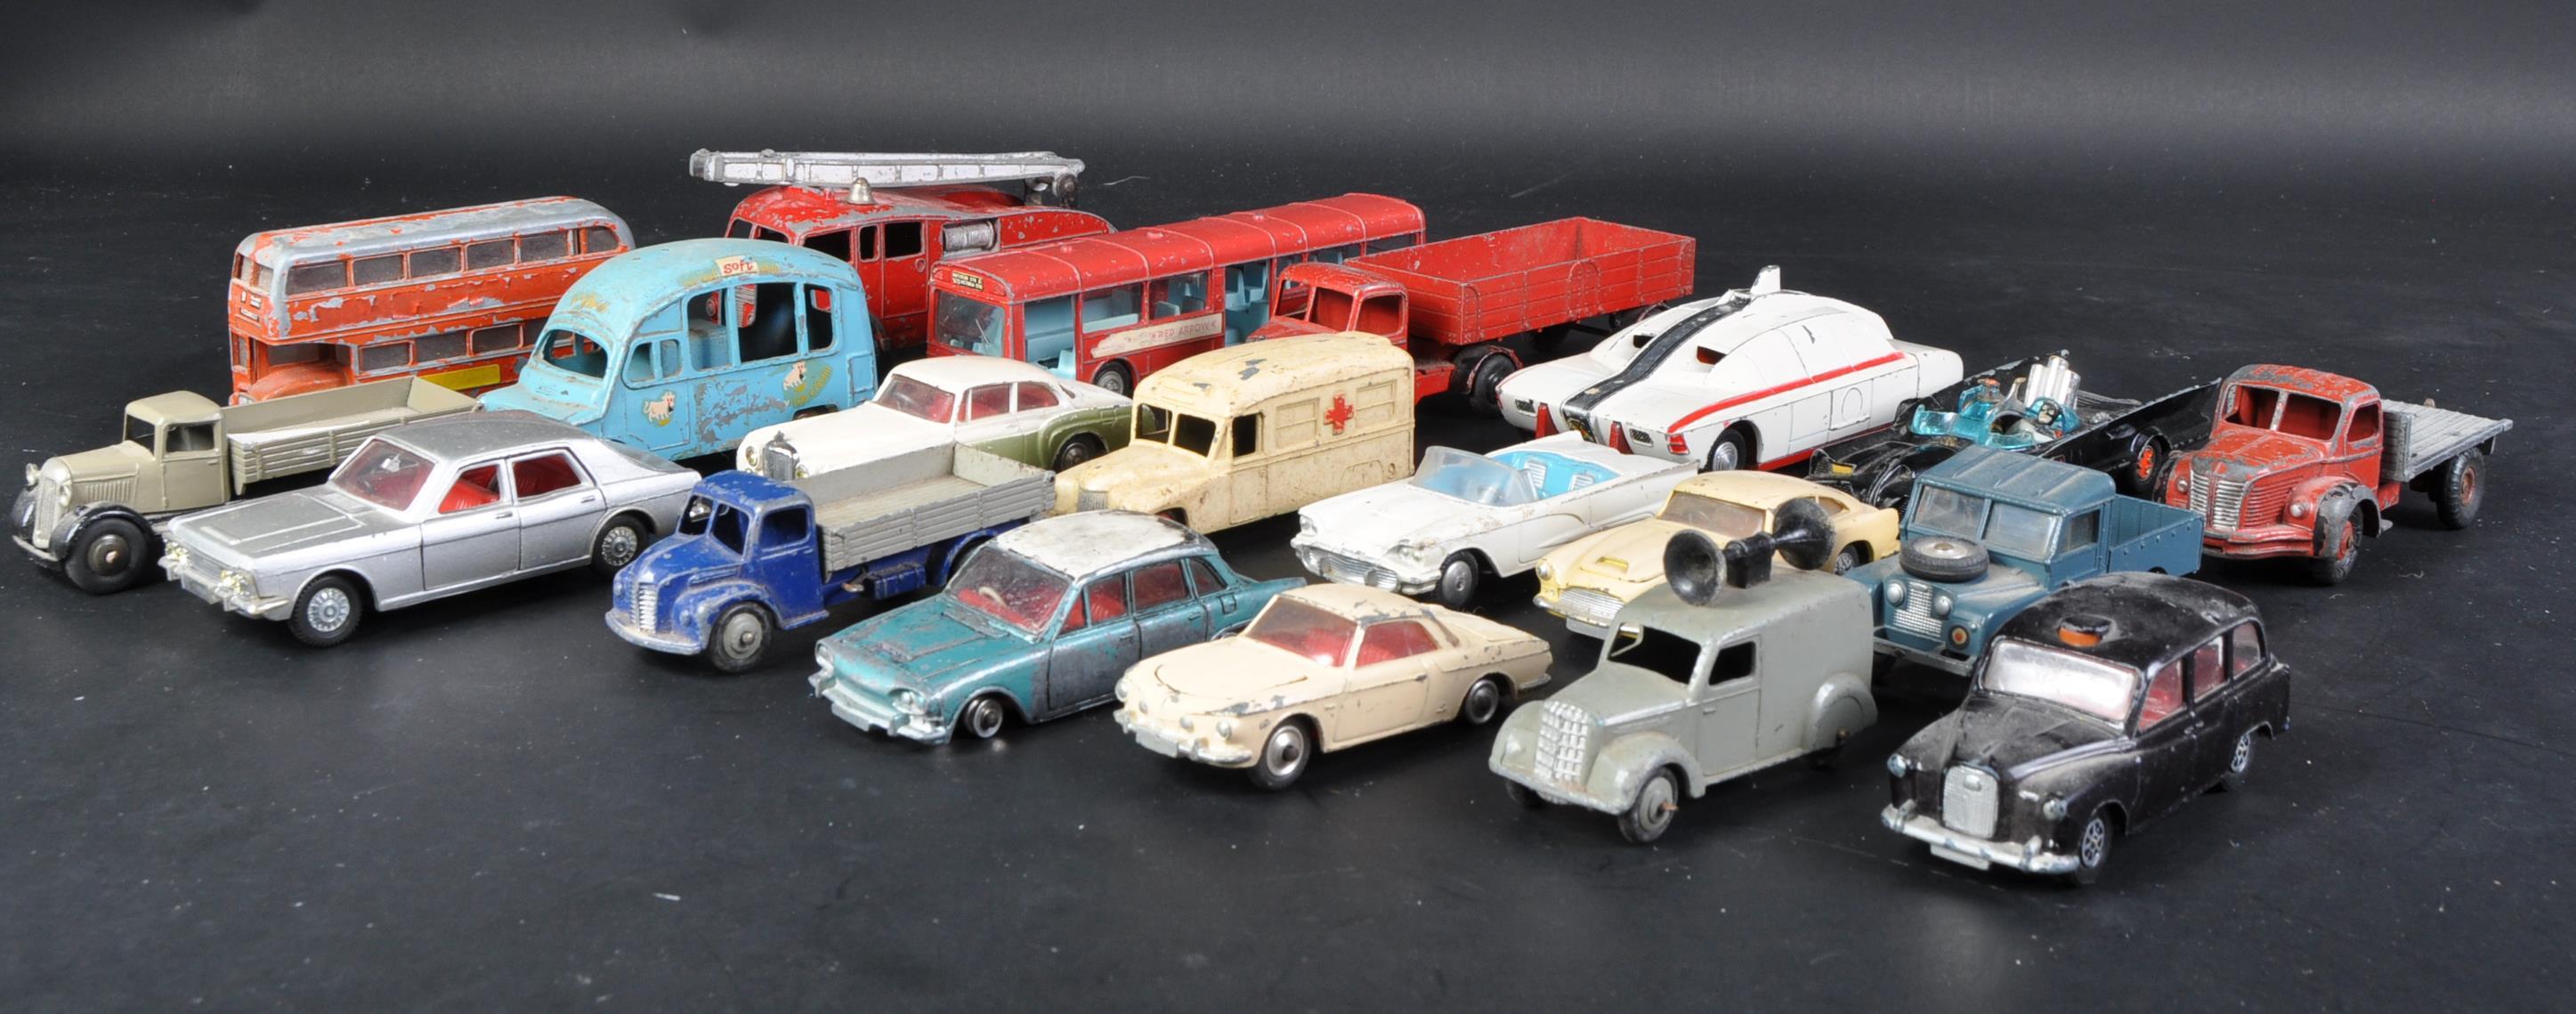 COLLECTION OF ASSORTED VINTAGE CORGI & DINKY TOYS DIECAST MODELS - Image 2 of 7